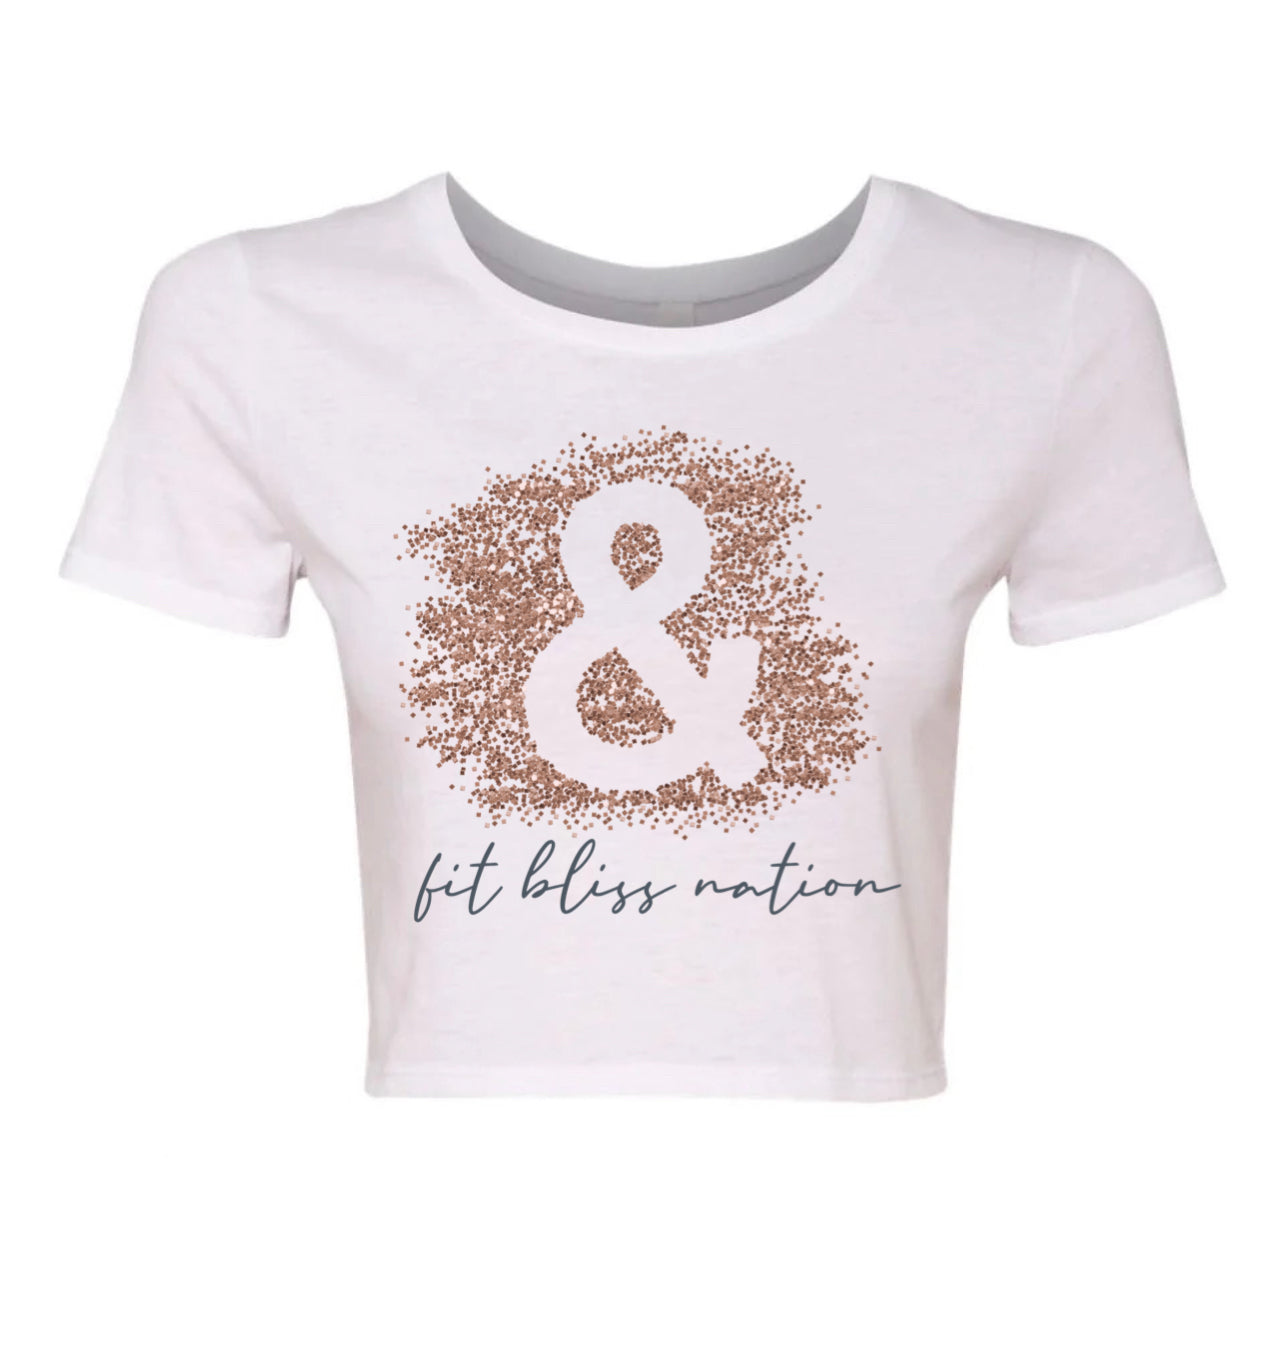 FIT BLISS NATION CROP TEE